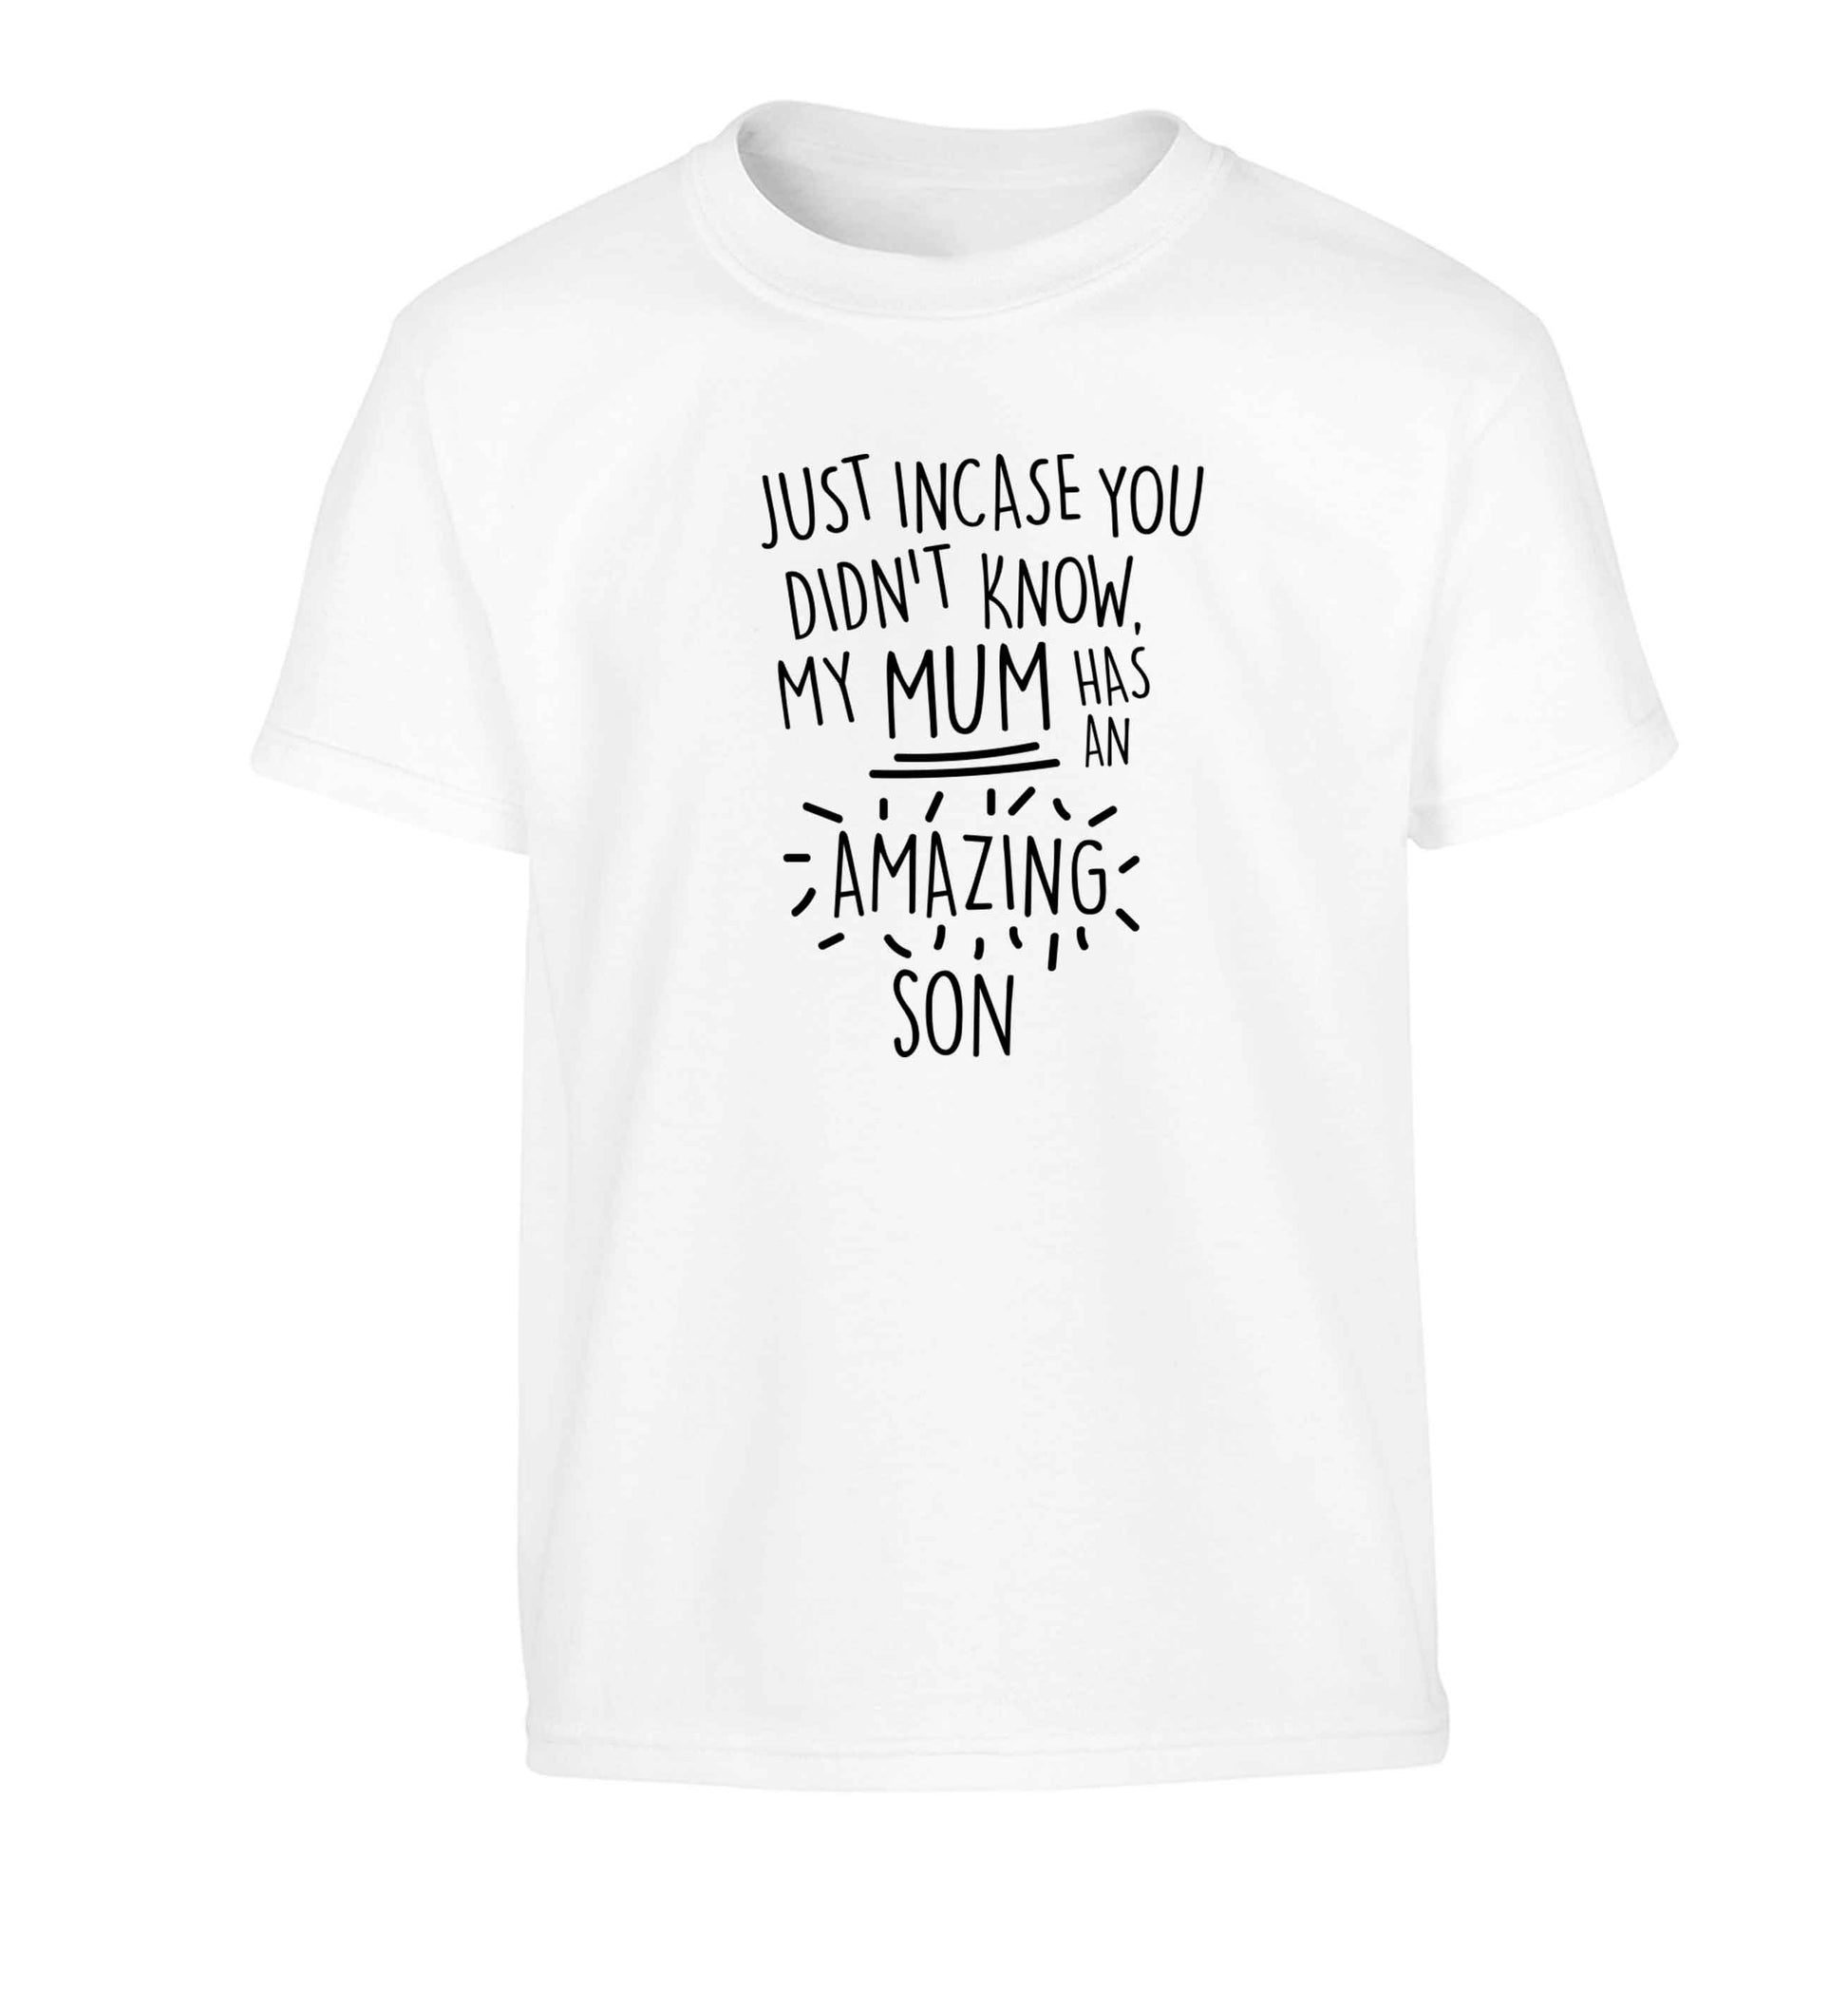 Just incase you didn't know my mum has an amazing son Children's white Tshirt 12-13 Years